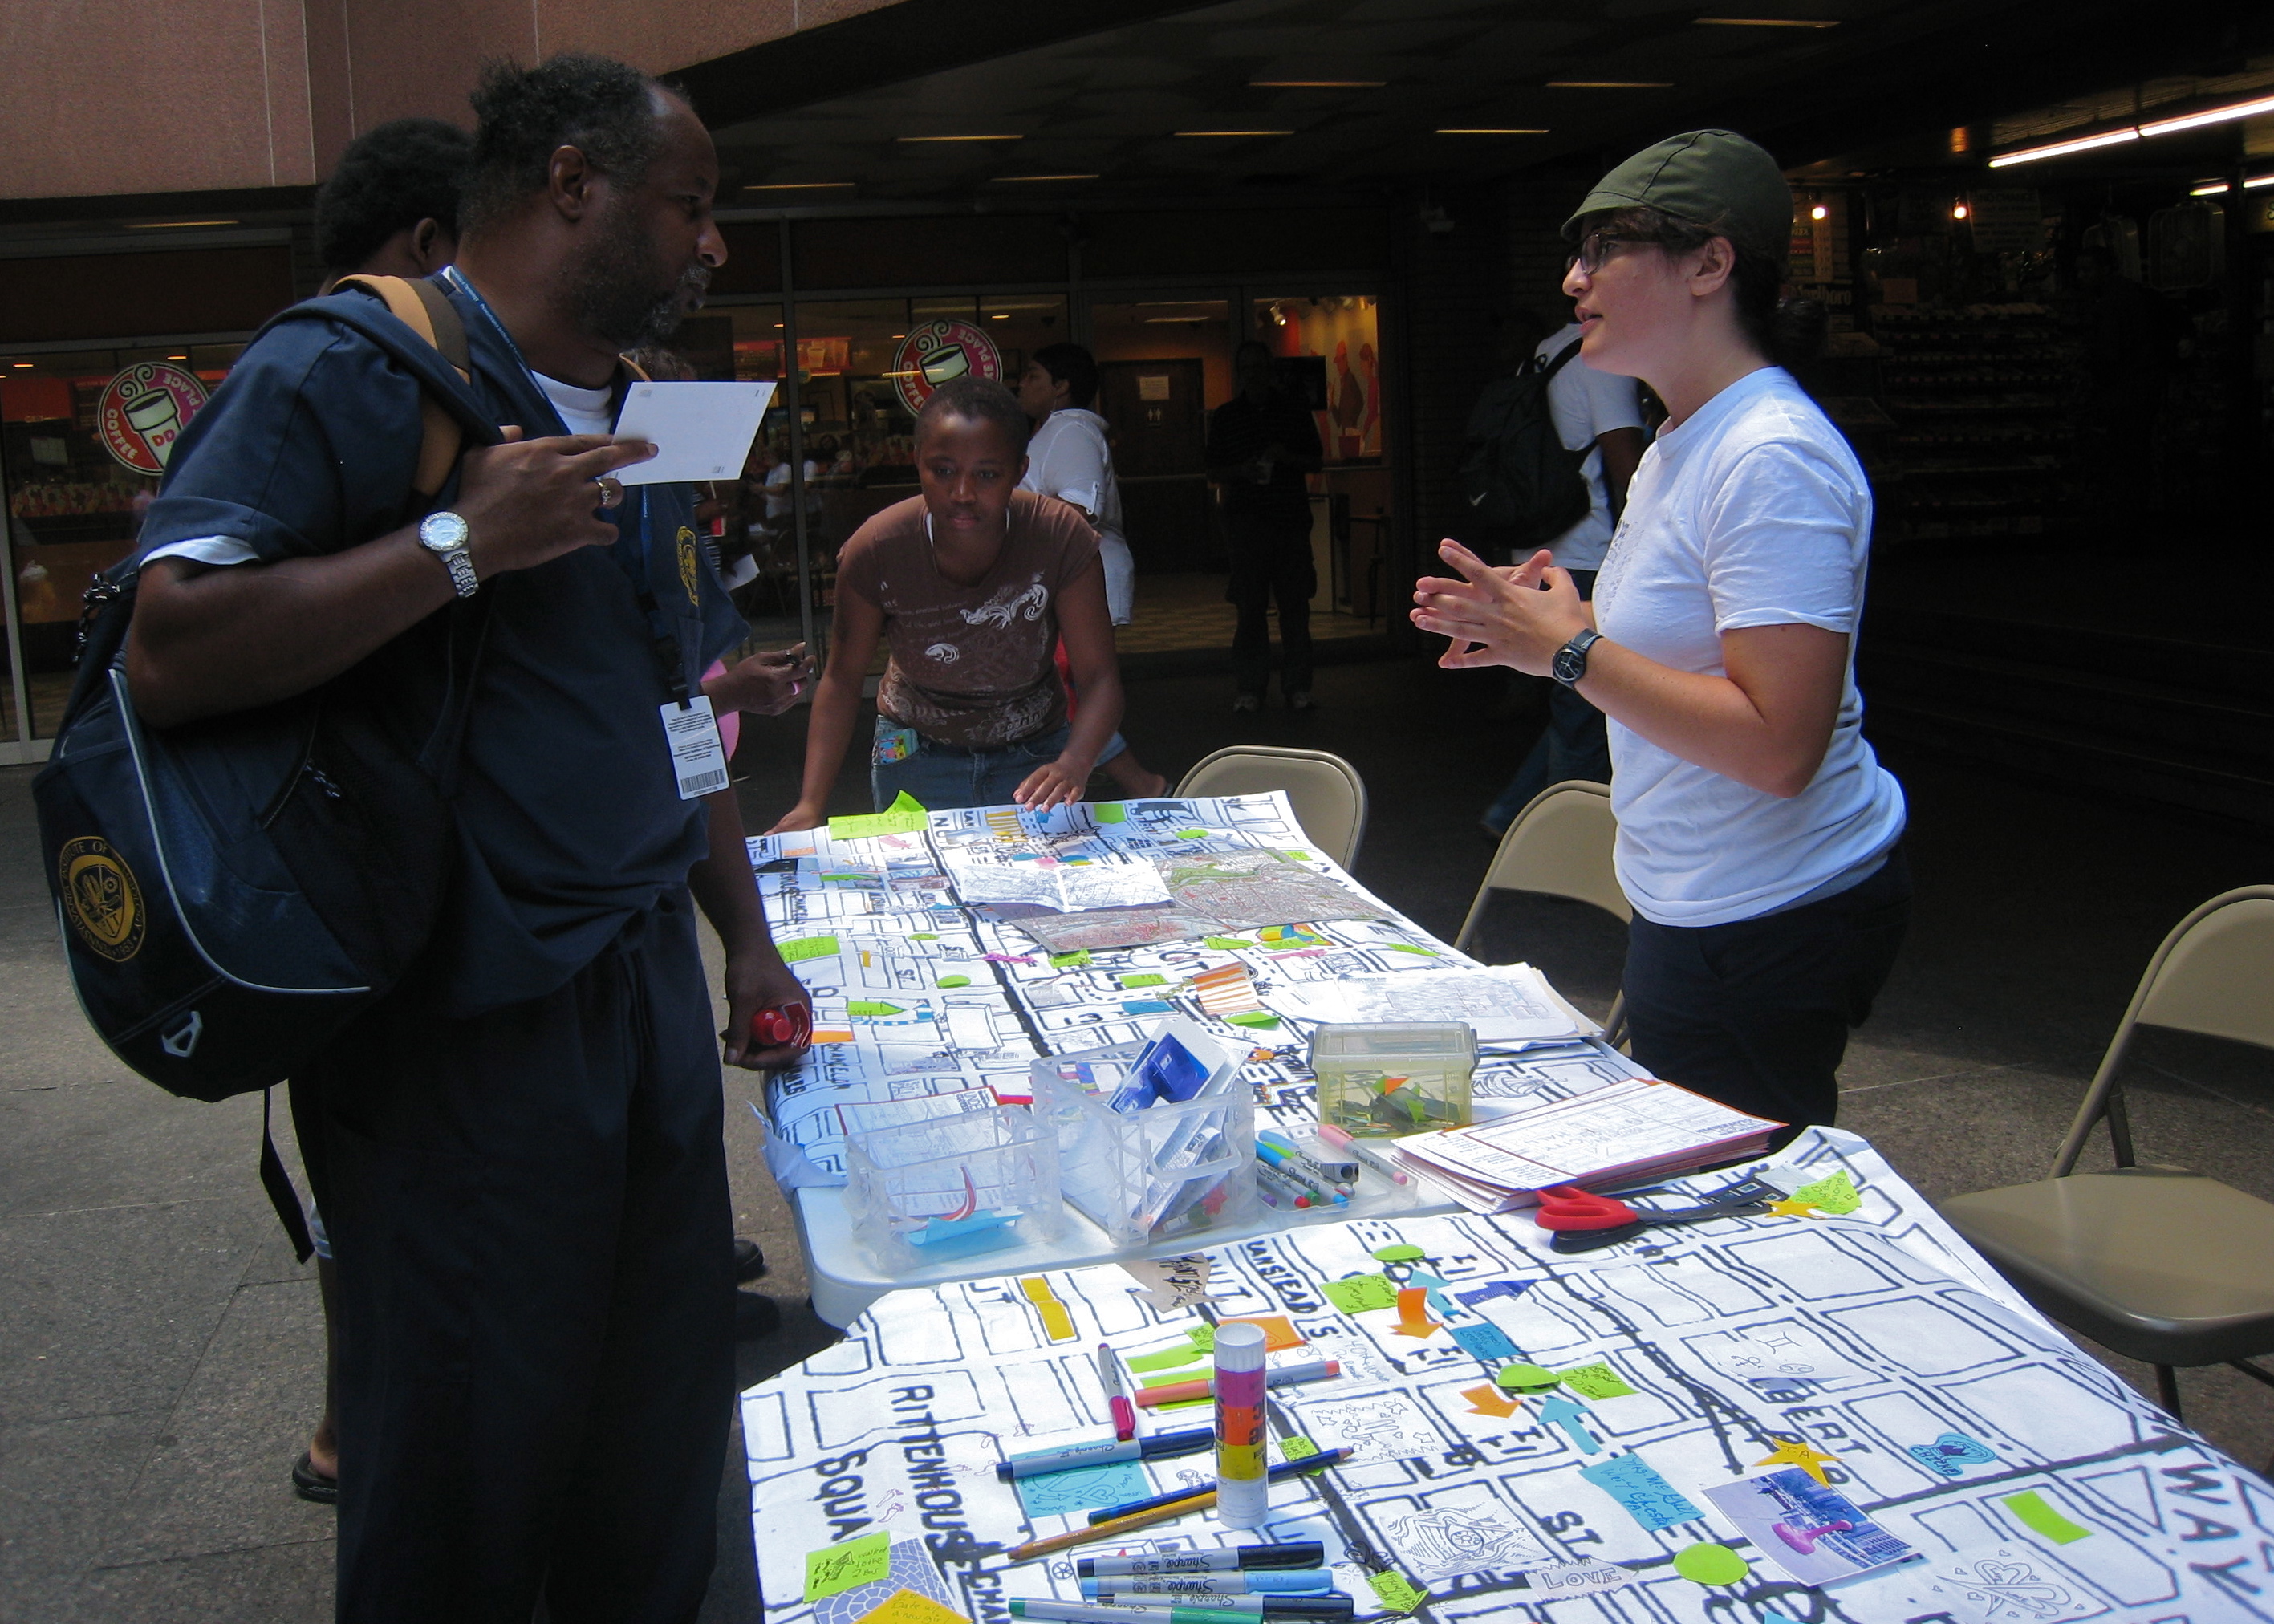 (Miriam Singer (right) talking to people passing through Centre Square's subway concourse entrance, asking them to add their routes and stories to the big map.)